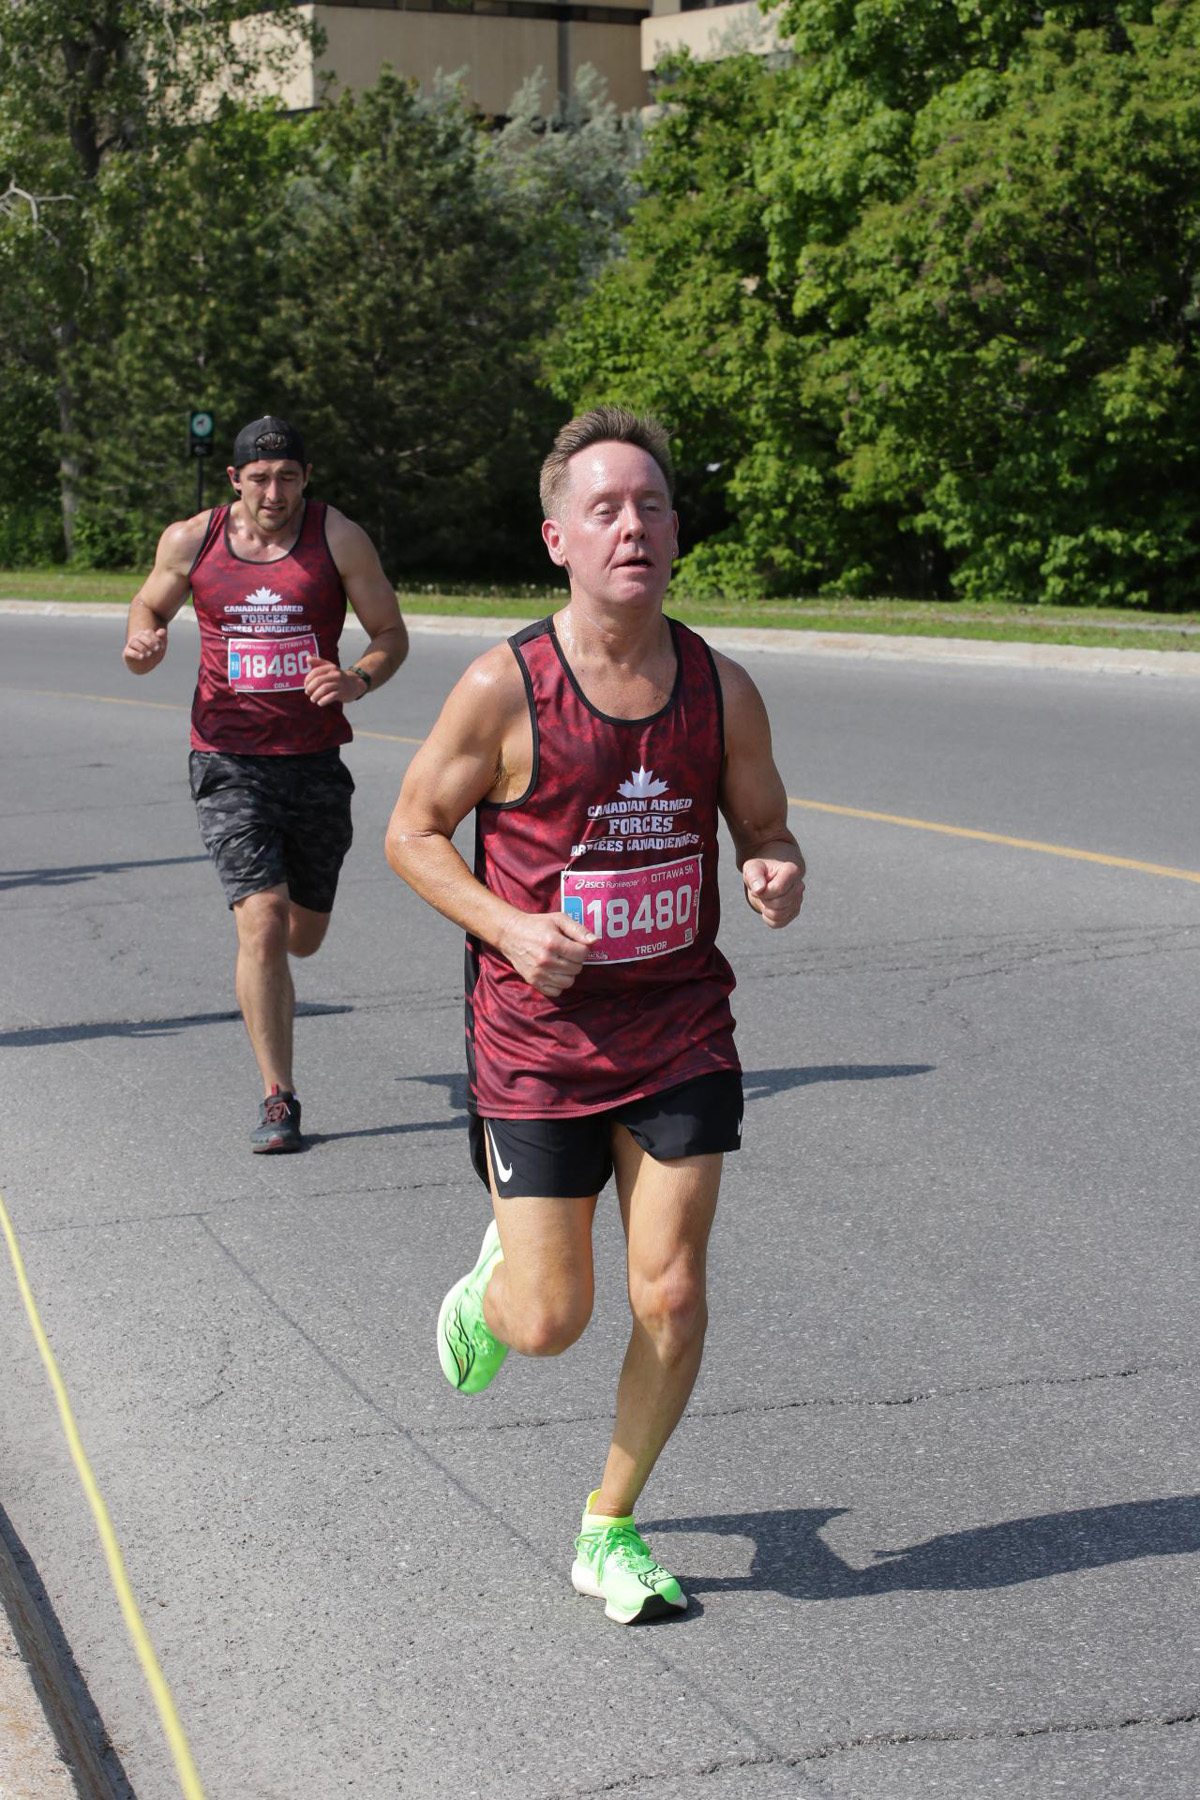 Petty Officer First Class Trevor Scoville who won the CAF silver medal in the 5K race in the Men’s Senior (48+) category.  Photos provided